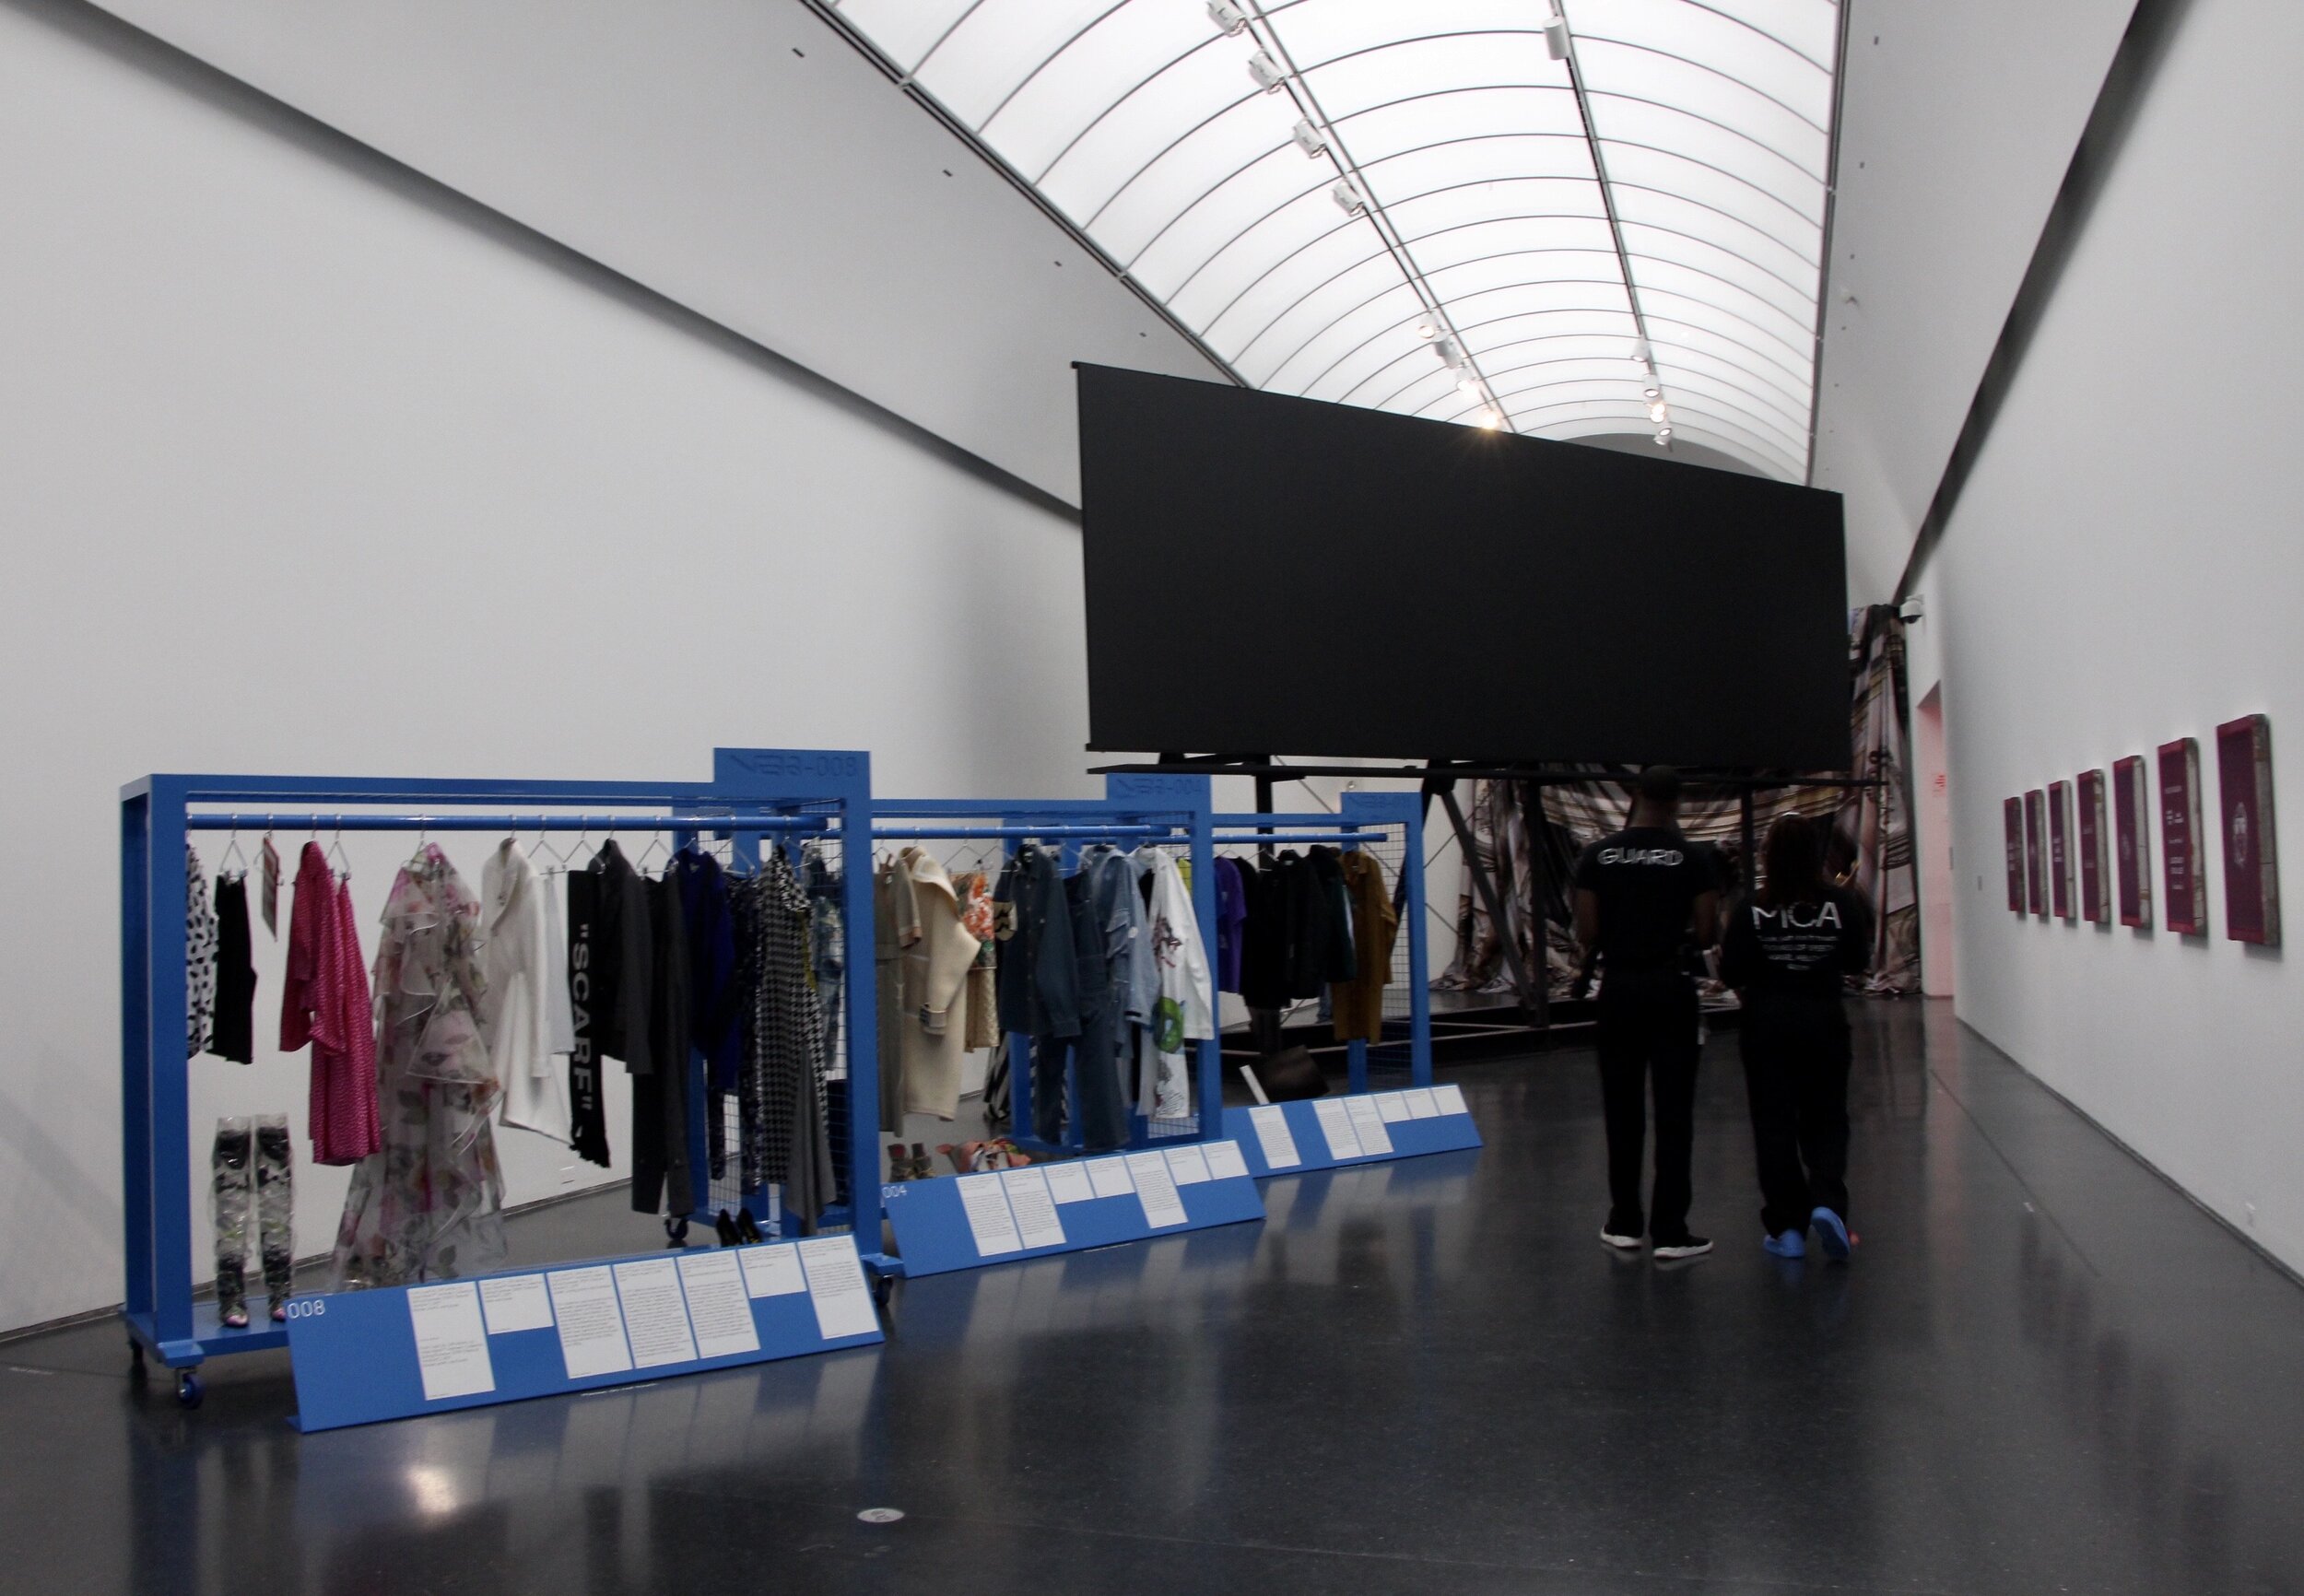  Inside Chicago’s Museum of Contemporary Art, seven rooms helped showcase Virgil Abloh’s ‘Figures of Speech’ exhibit. At the end of one room, azure blue racks with ‘Off-White’ and Louis Vuitton garments and an all-black billboard were on display. 